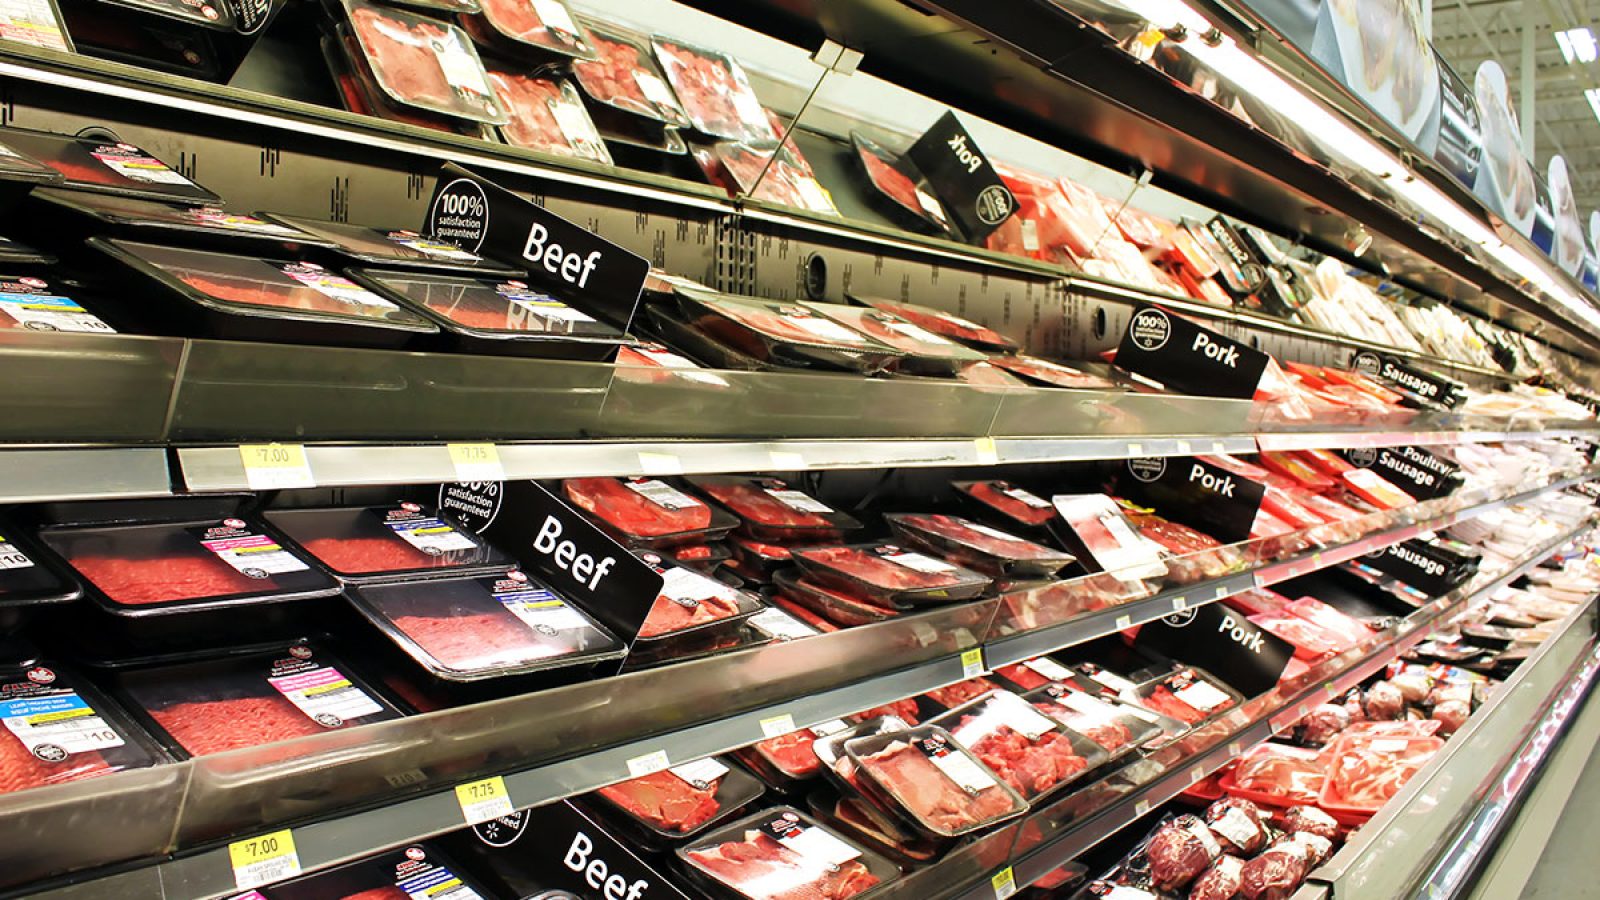 7 Meat Buying Hacks All Shoppers Should Know | Eat This Not That